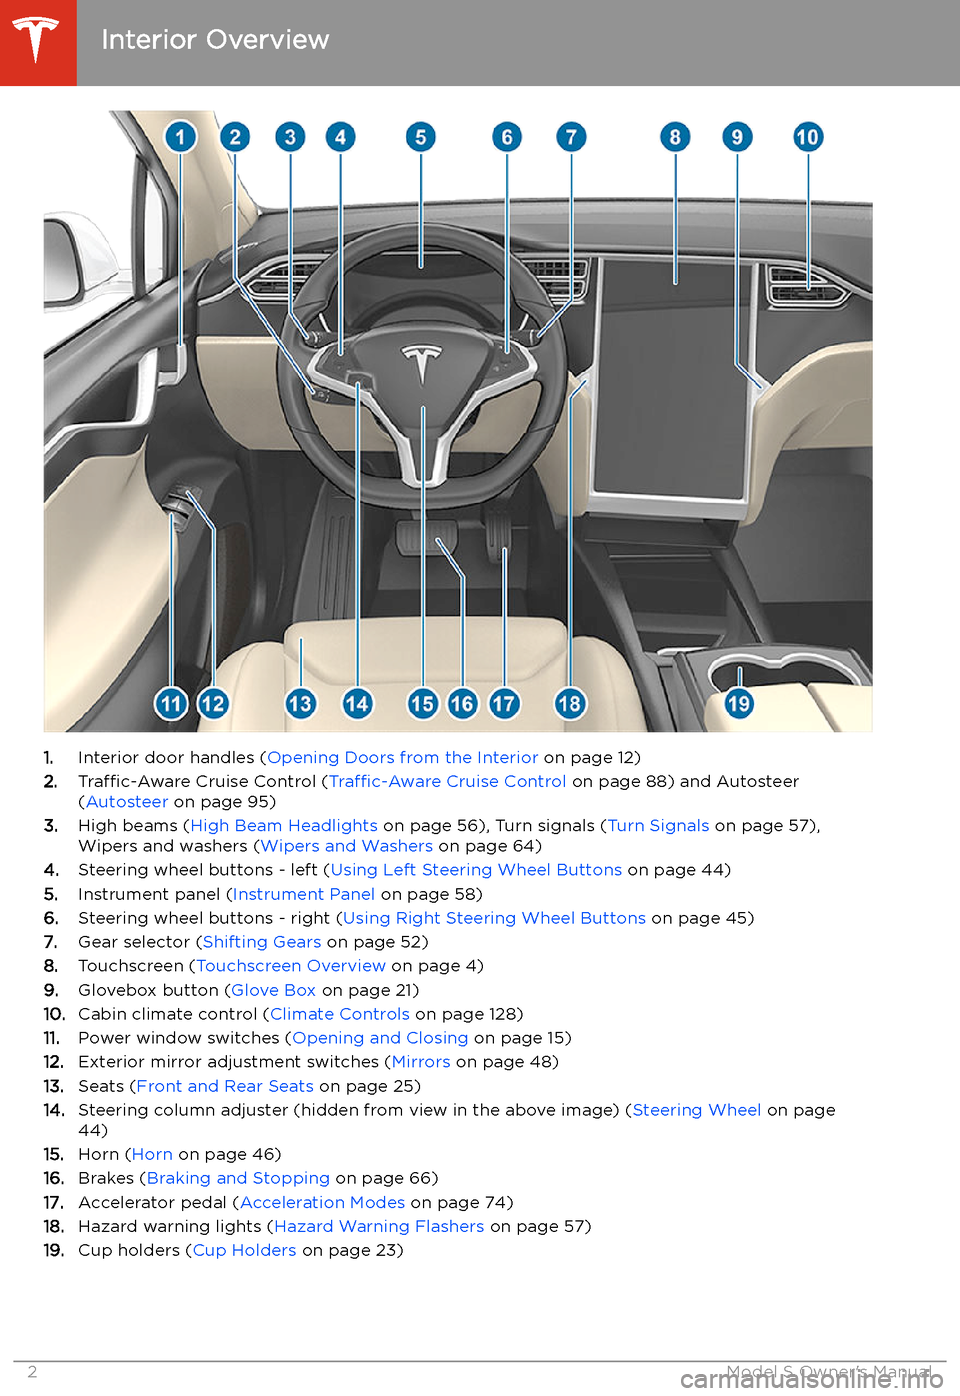 TESLA MODEL S 2020  Owners Manual Overview
Interior Overview
1. Interior door handles ( Opening Doors from the Interior  on page 12)
2. Traffic-Aware  Cruise Control ( Traffic-Aware Cruise Control  on page 88) and Autosteer
( Autostee